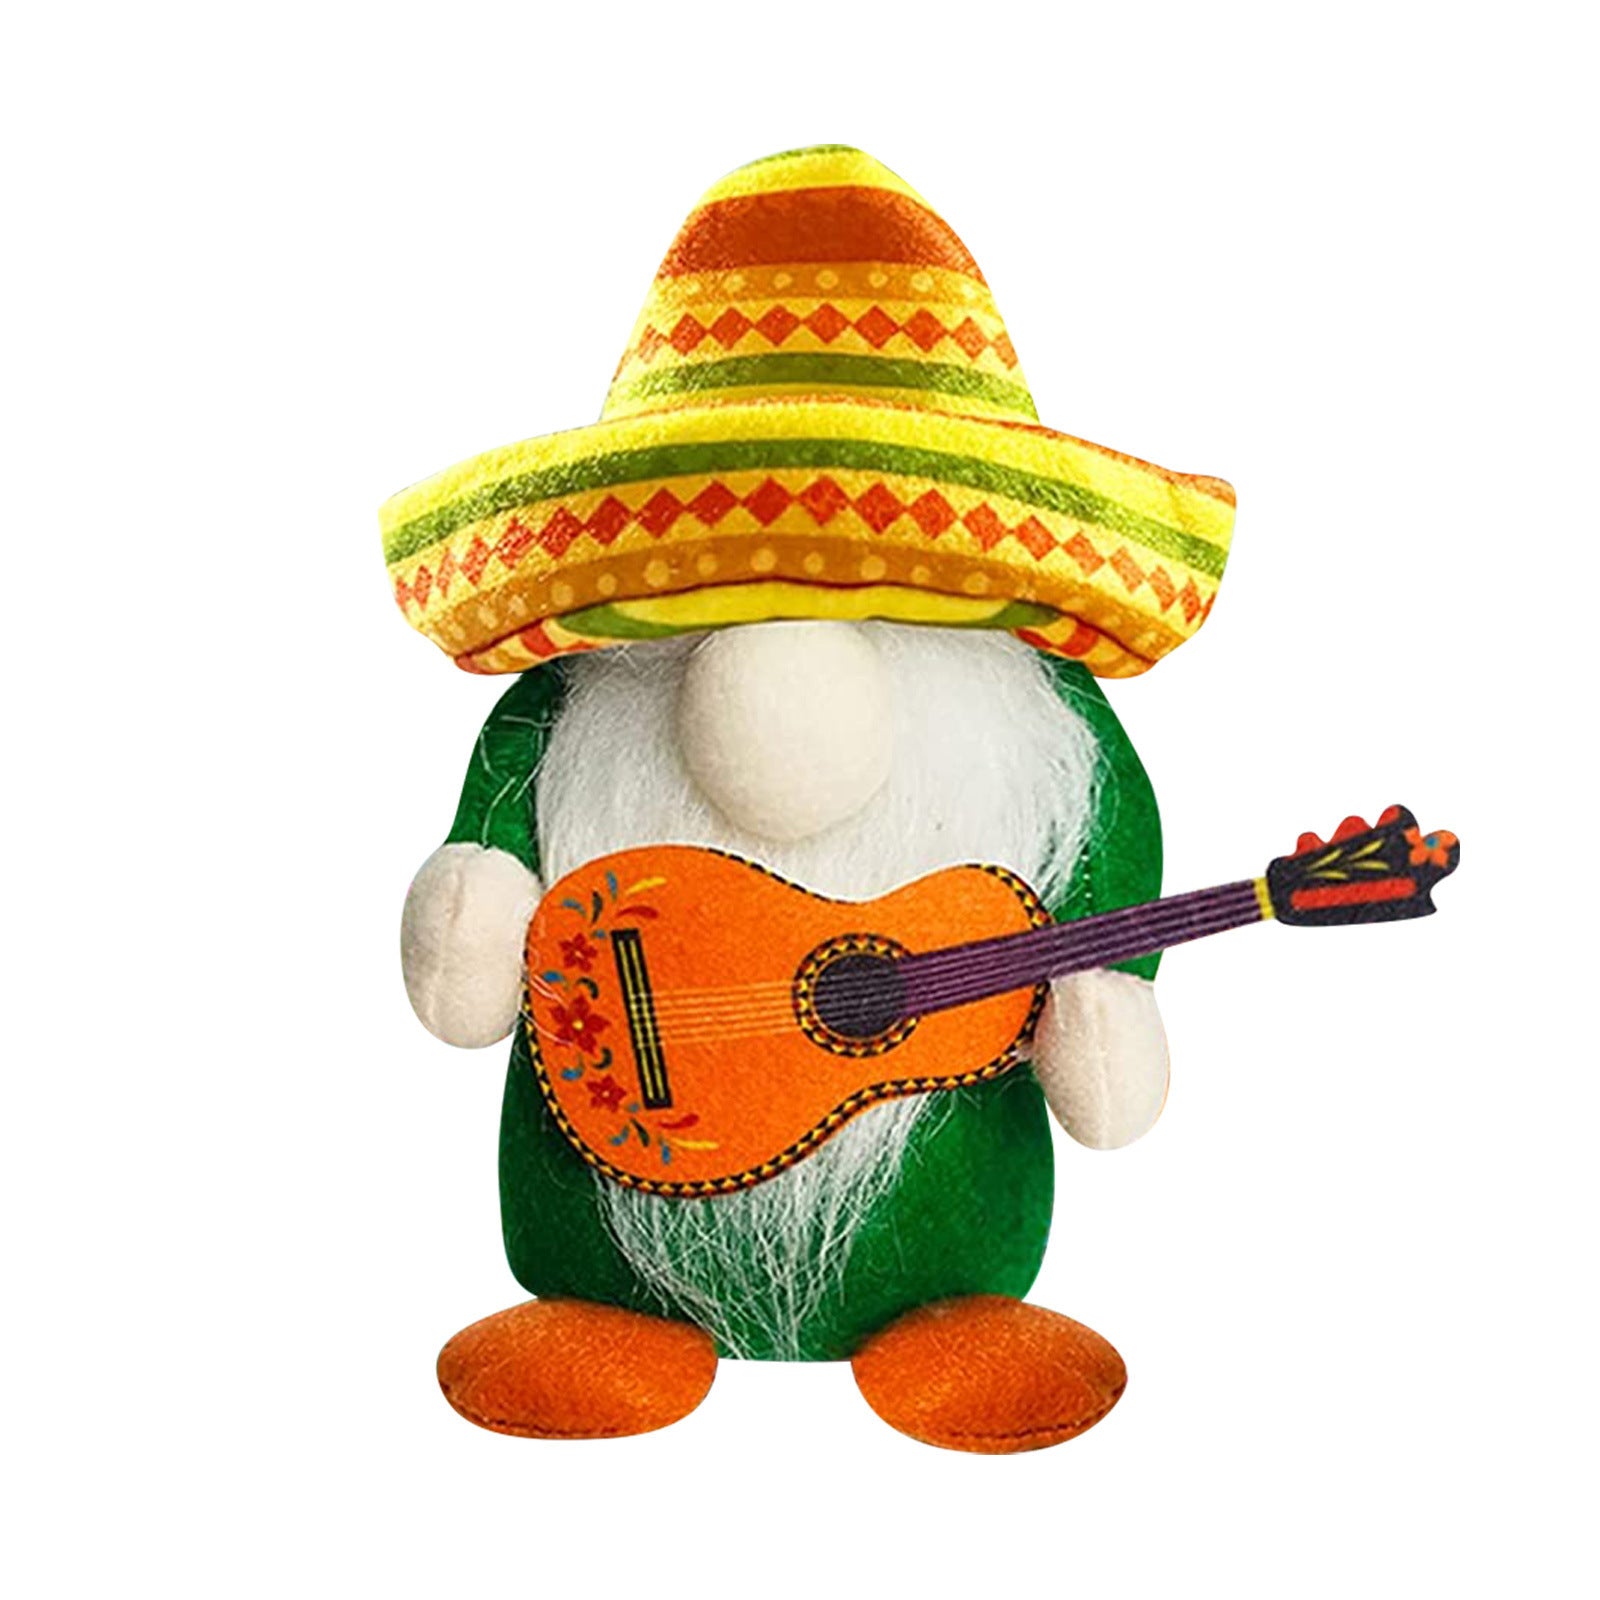 Faceless Old Man Hawaiian Style Mexican Straw Hat Doll Ornament, Mexican Gnome Collection, Cinco De Mayo Gnome, Mexican Fiesta Gnome, Cinco De Mayo Festival Gnome, Mexican gnomes for sale, Mexican gangster gnome, Hispanic gnomes, Mexican yard gnome, Mexican lawn gnome,